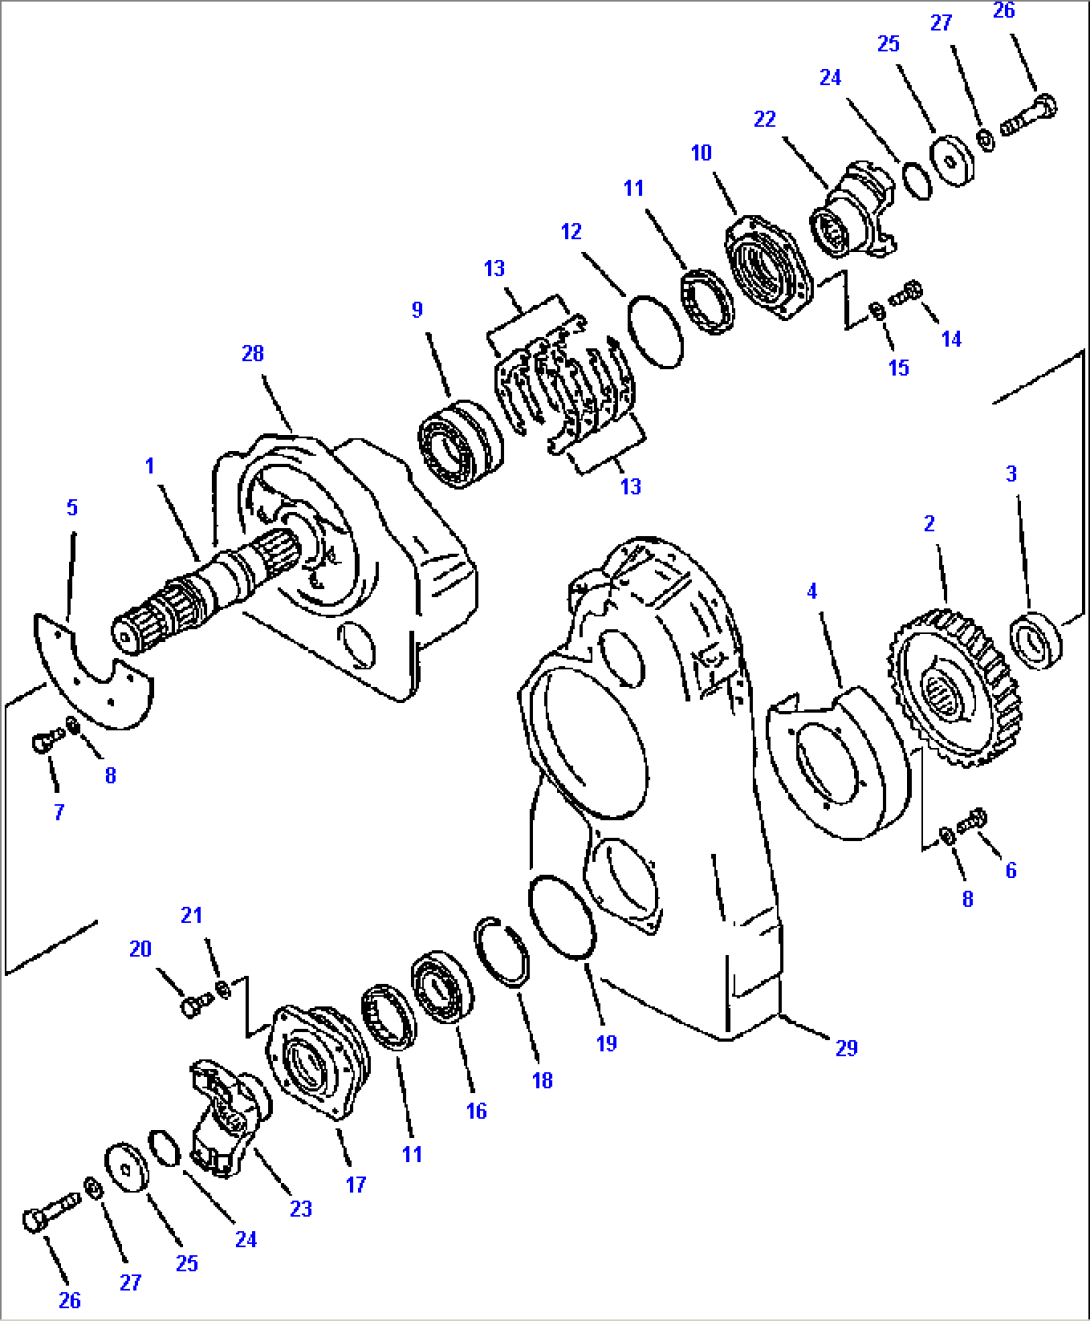 FIG NO. 2518 TRANSMISSION LOWER OUTPUT GEARS AND SHAFT